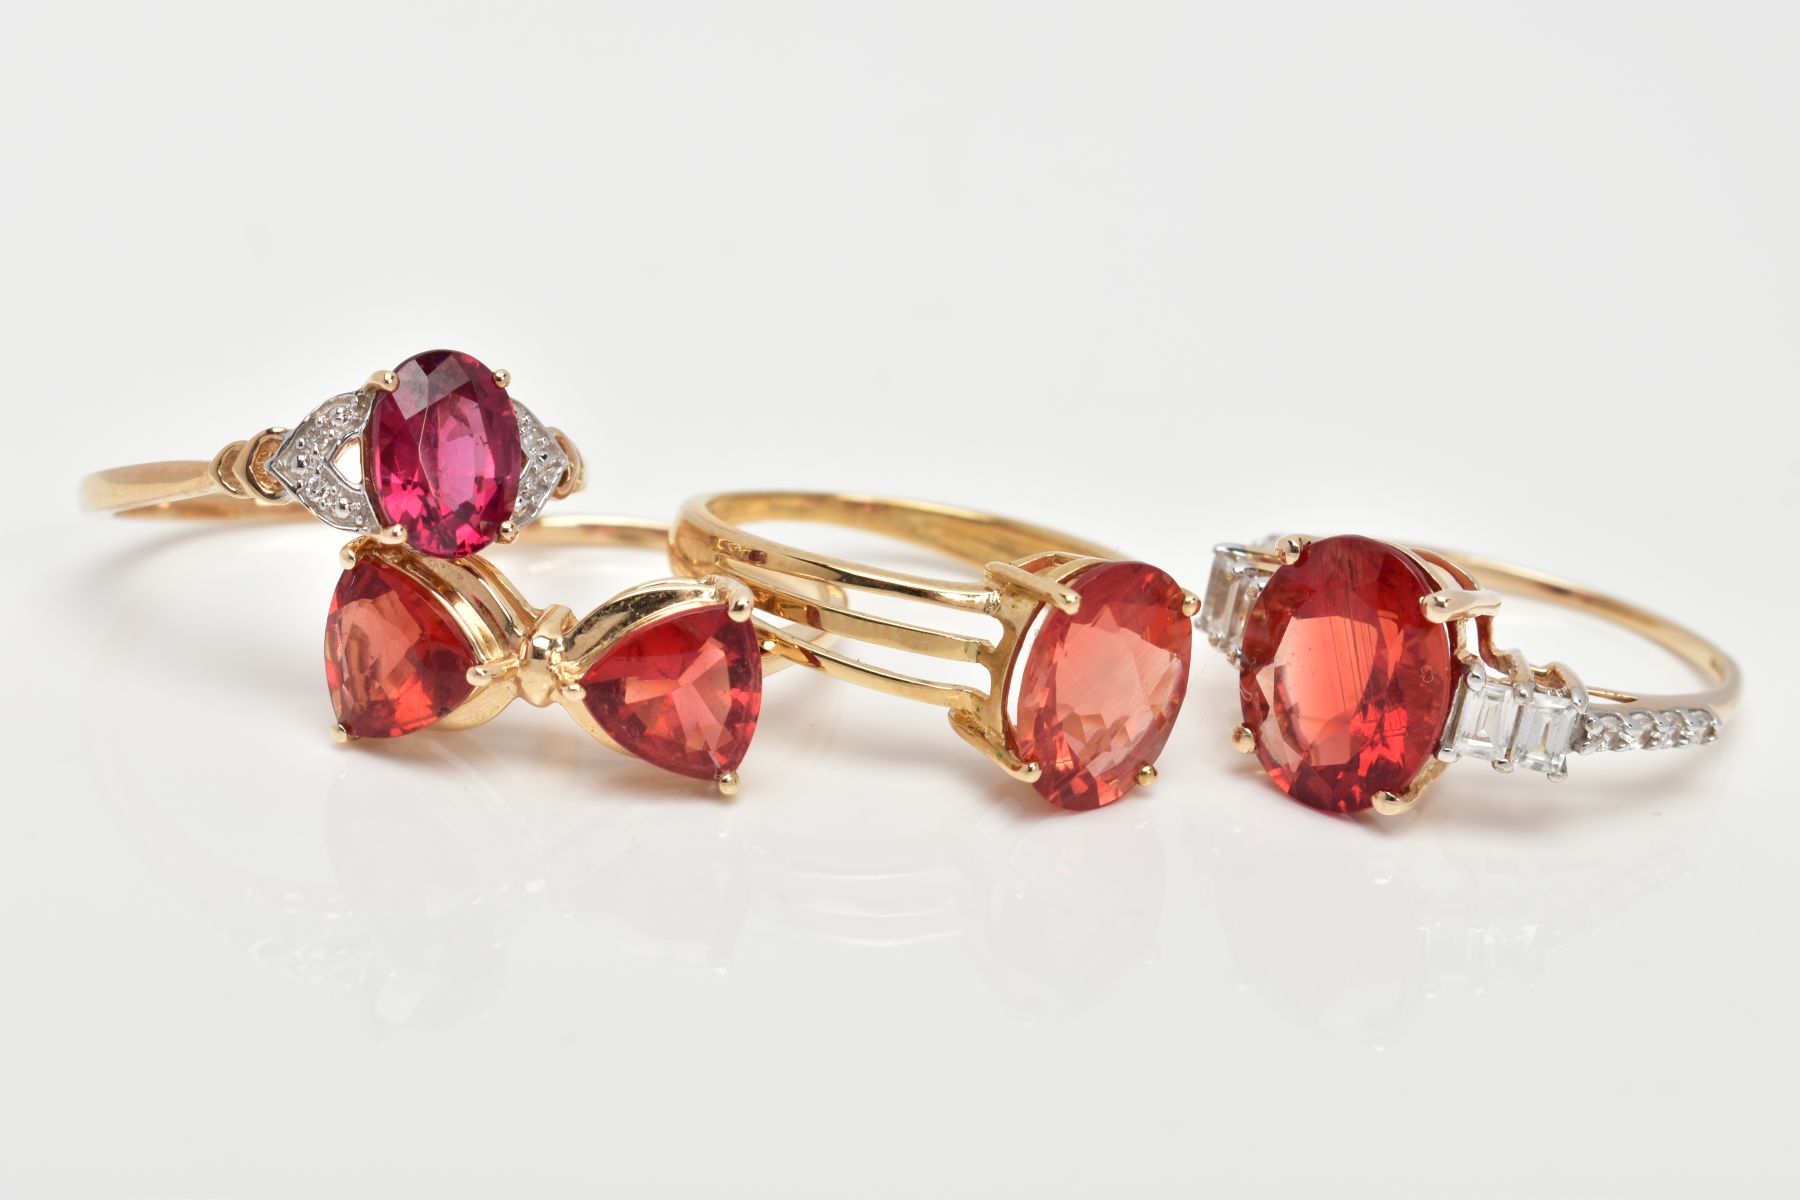 FOUR 9CT GOLD GEM SET RINGS, each set with orangish red stones, assessed as garnet and Oregan - Image 2 of 3